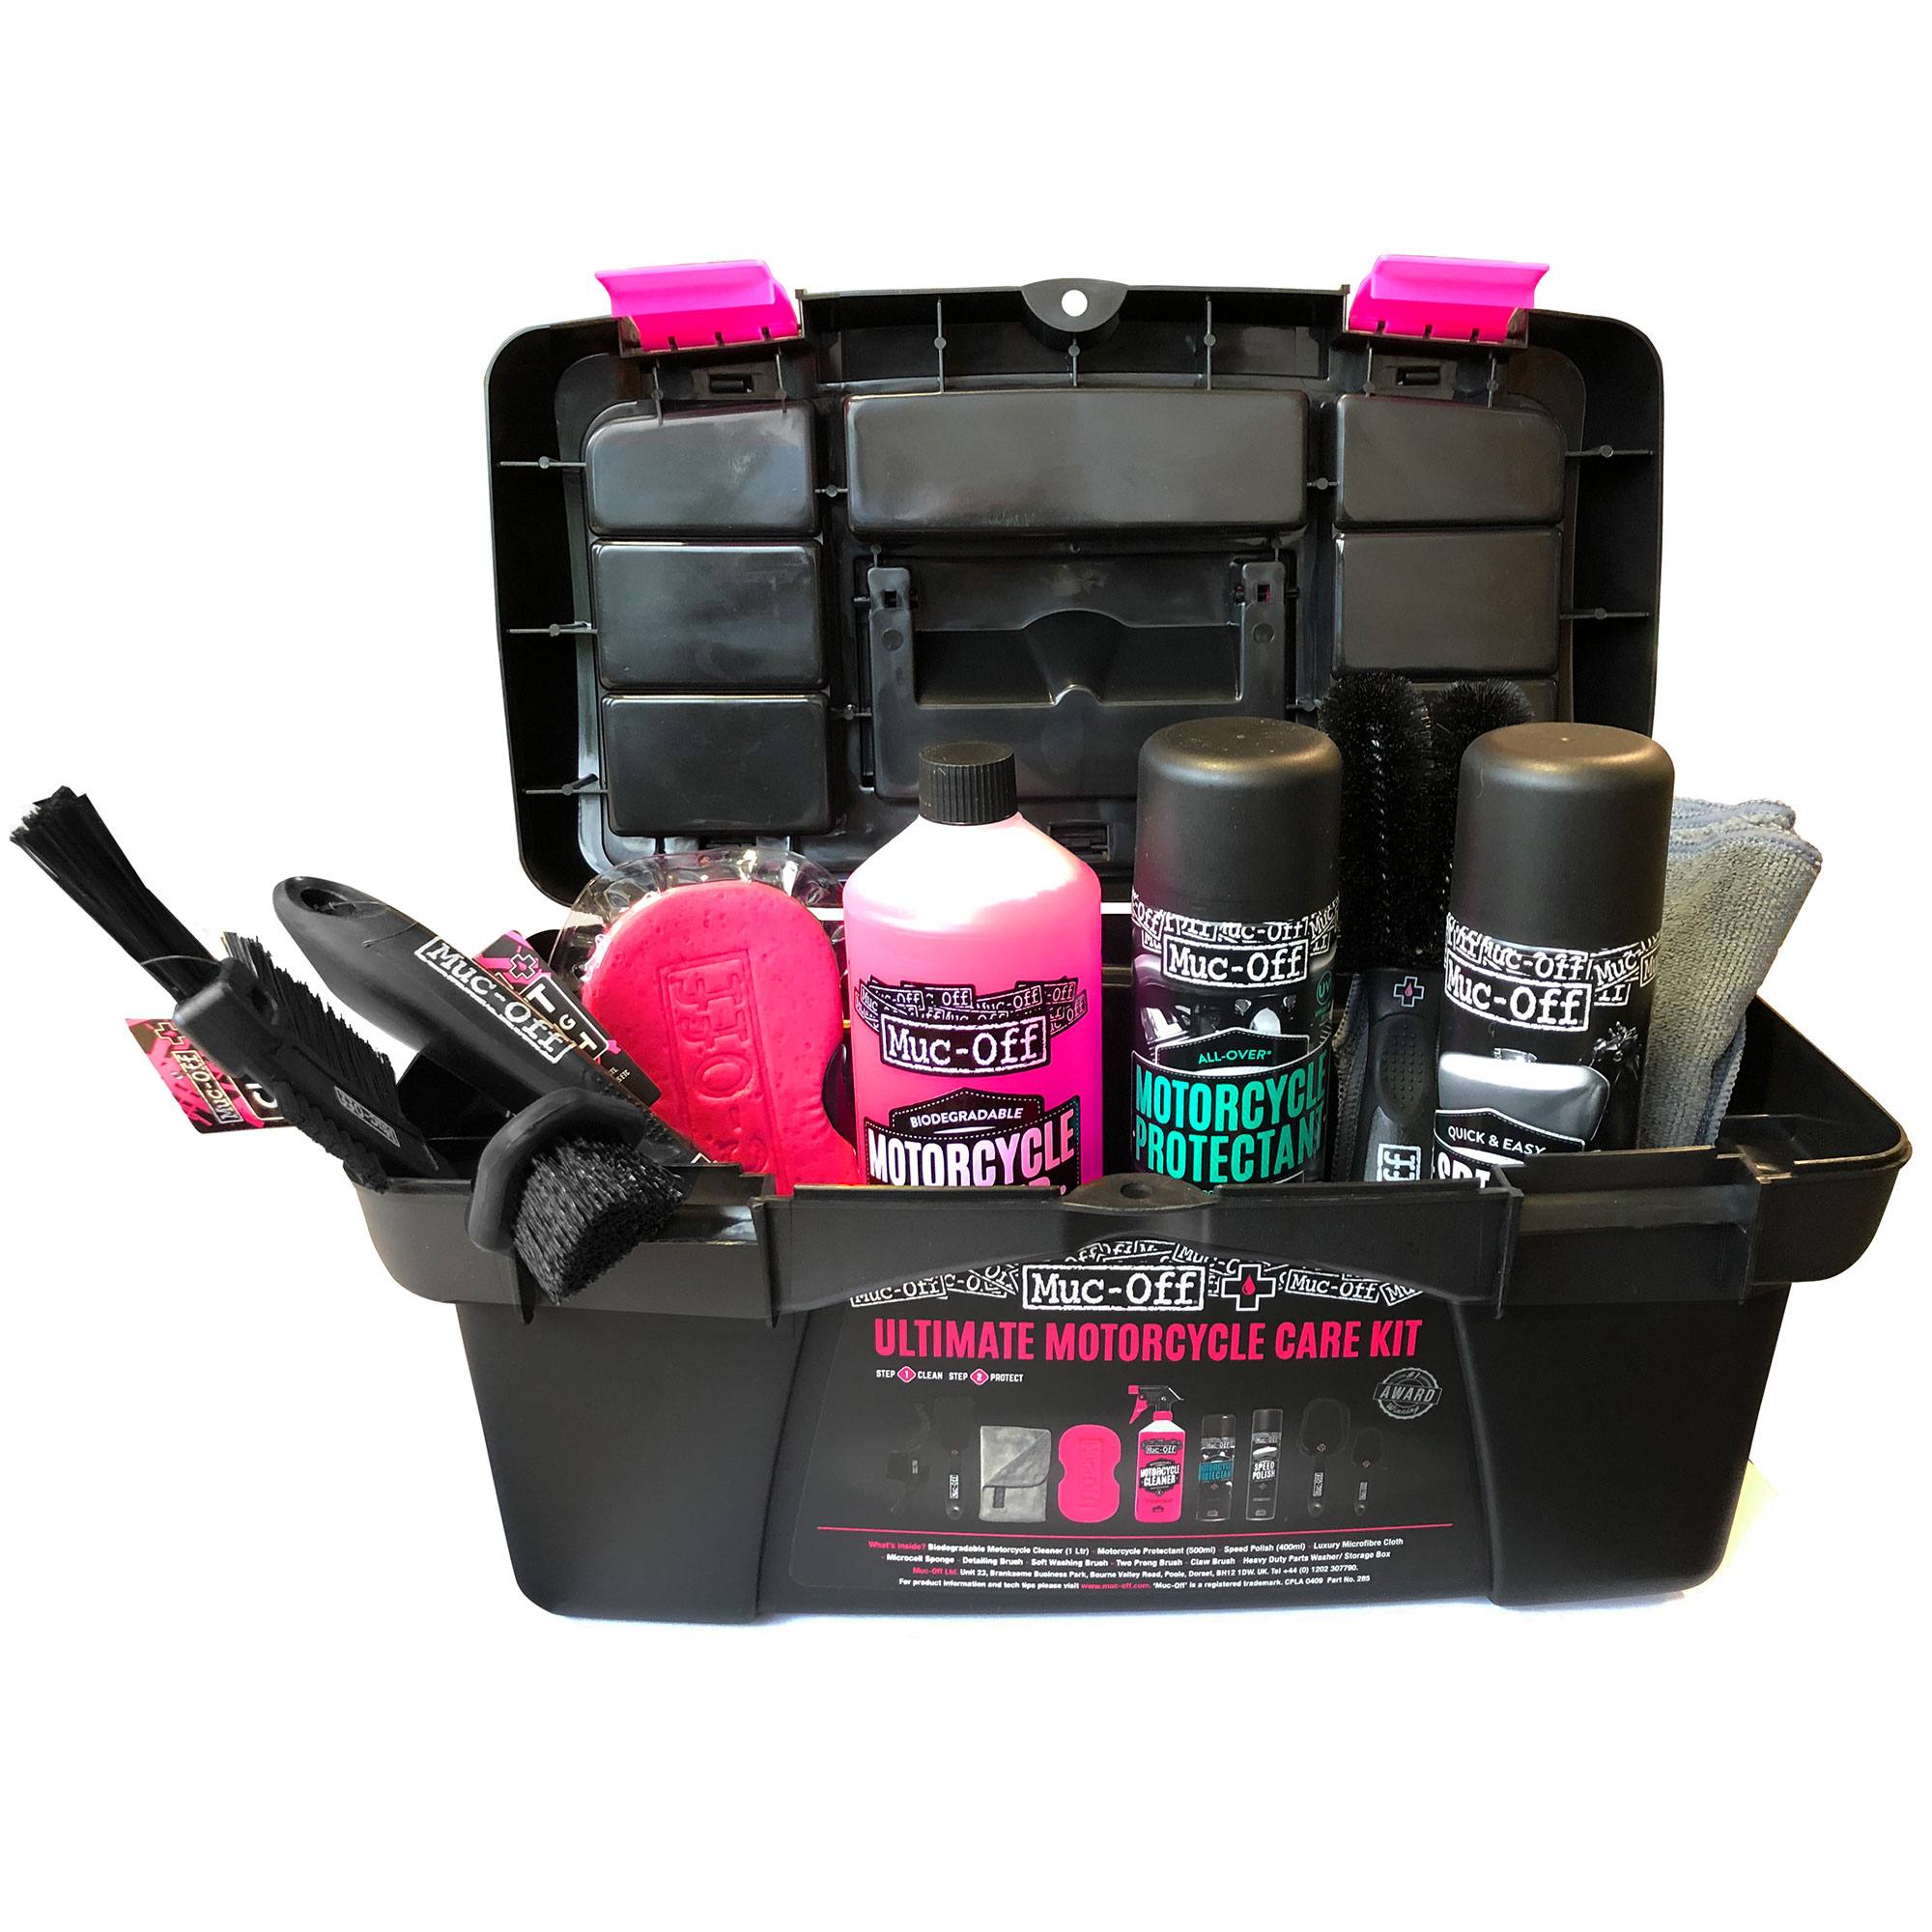 MUC-OFF MONTH OF JULY! Muc-Off ULTIMATE MOTORCYCLE CARE KIT ONLY 85 TICKETS!